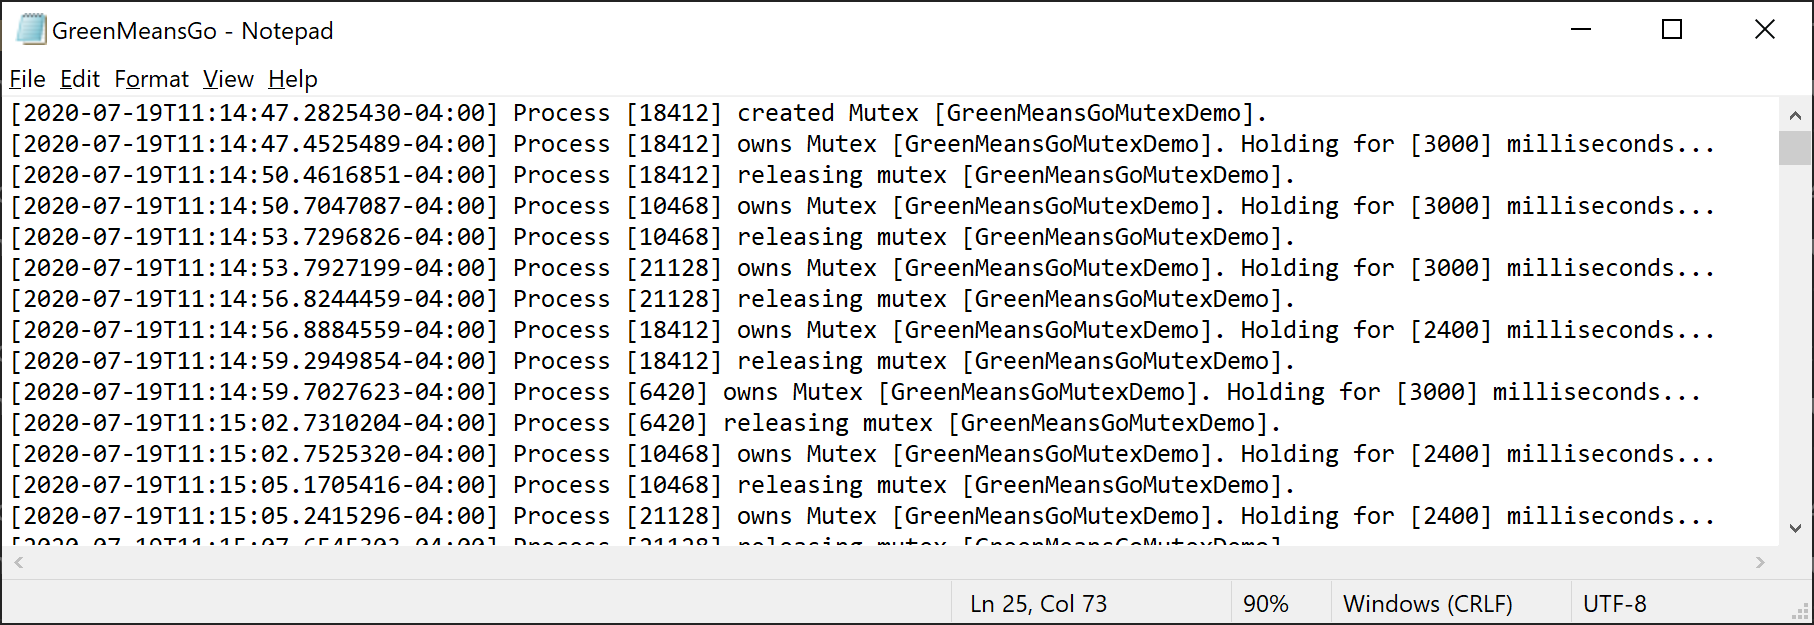 Green Means Go Mutex Demo Log File